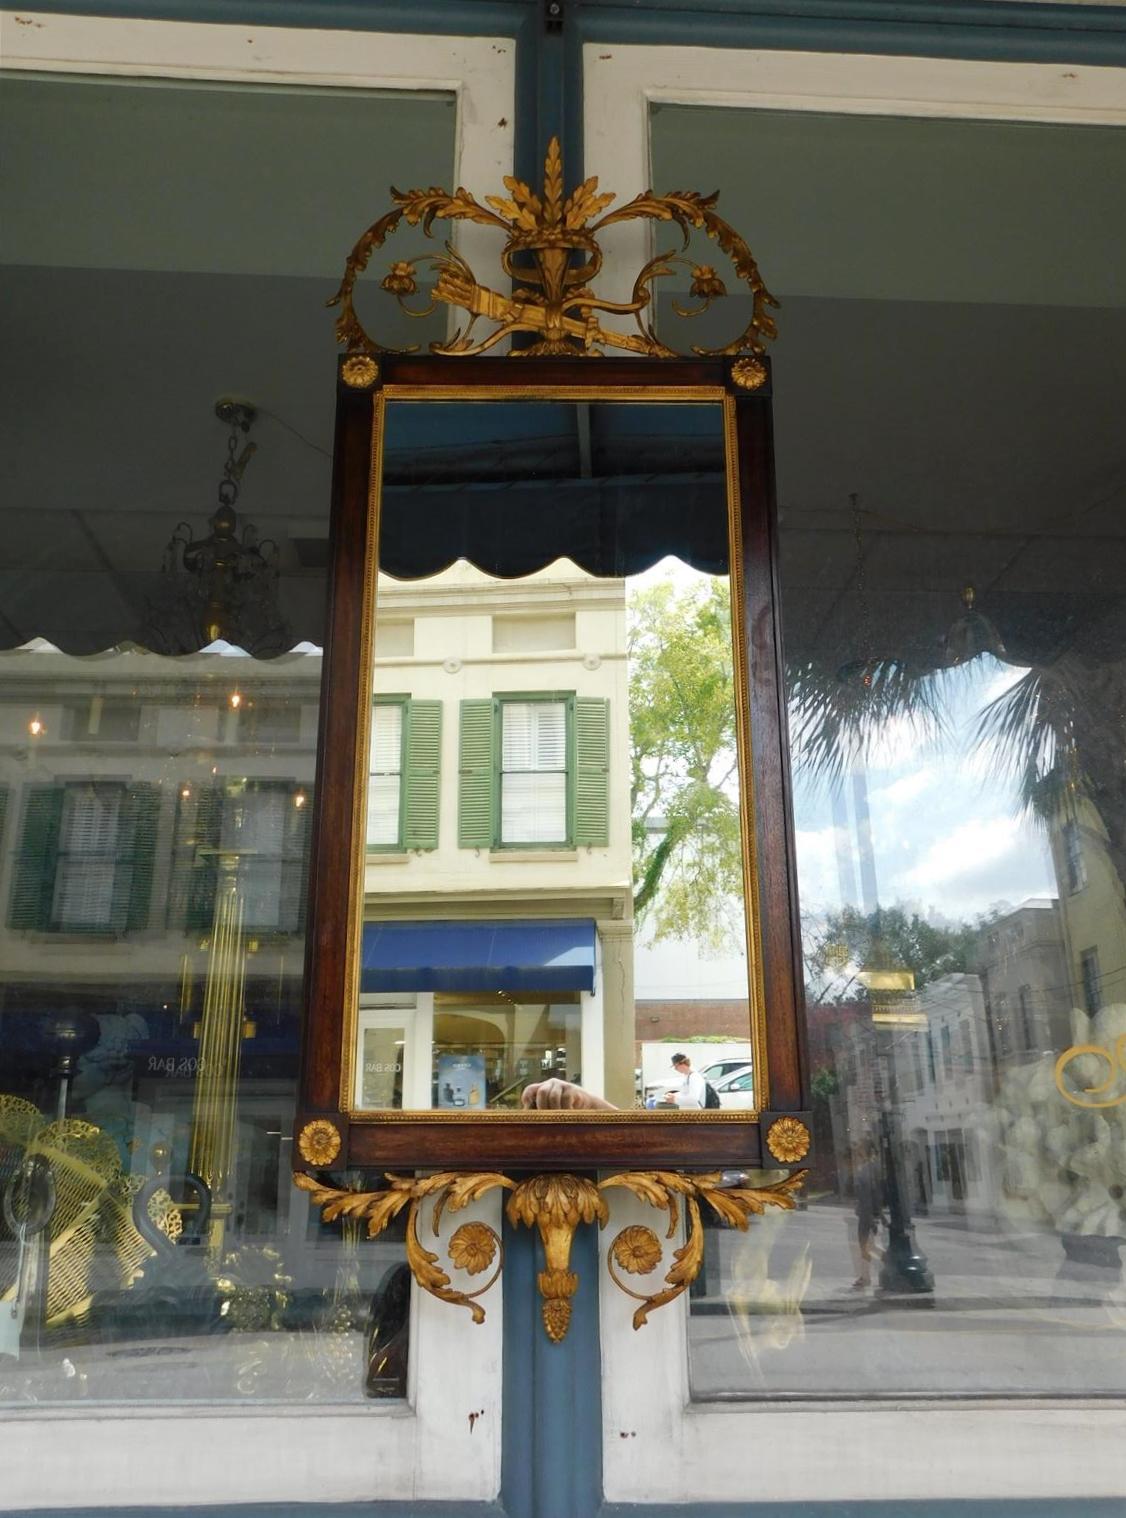 English Hepplewhite mahogany and gilt wood scrolled acanthus foliage wall mirror with central quiver and arrows, flanking corner medallions, and interior bead work, Late 18th century. Mirror retains the original silvered glass and backing.